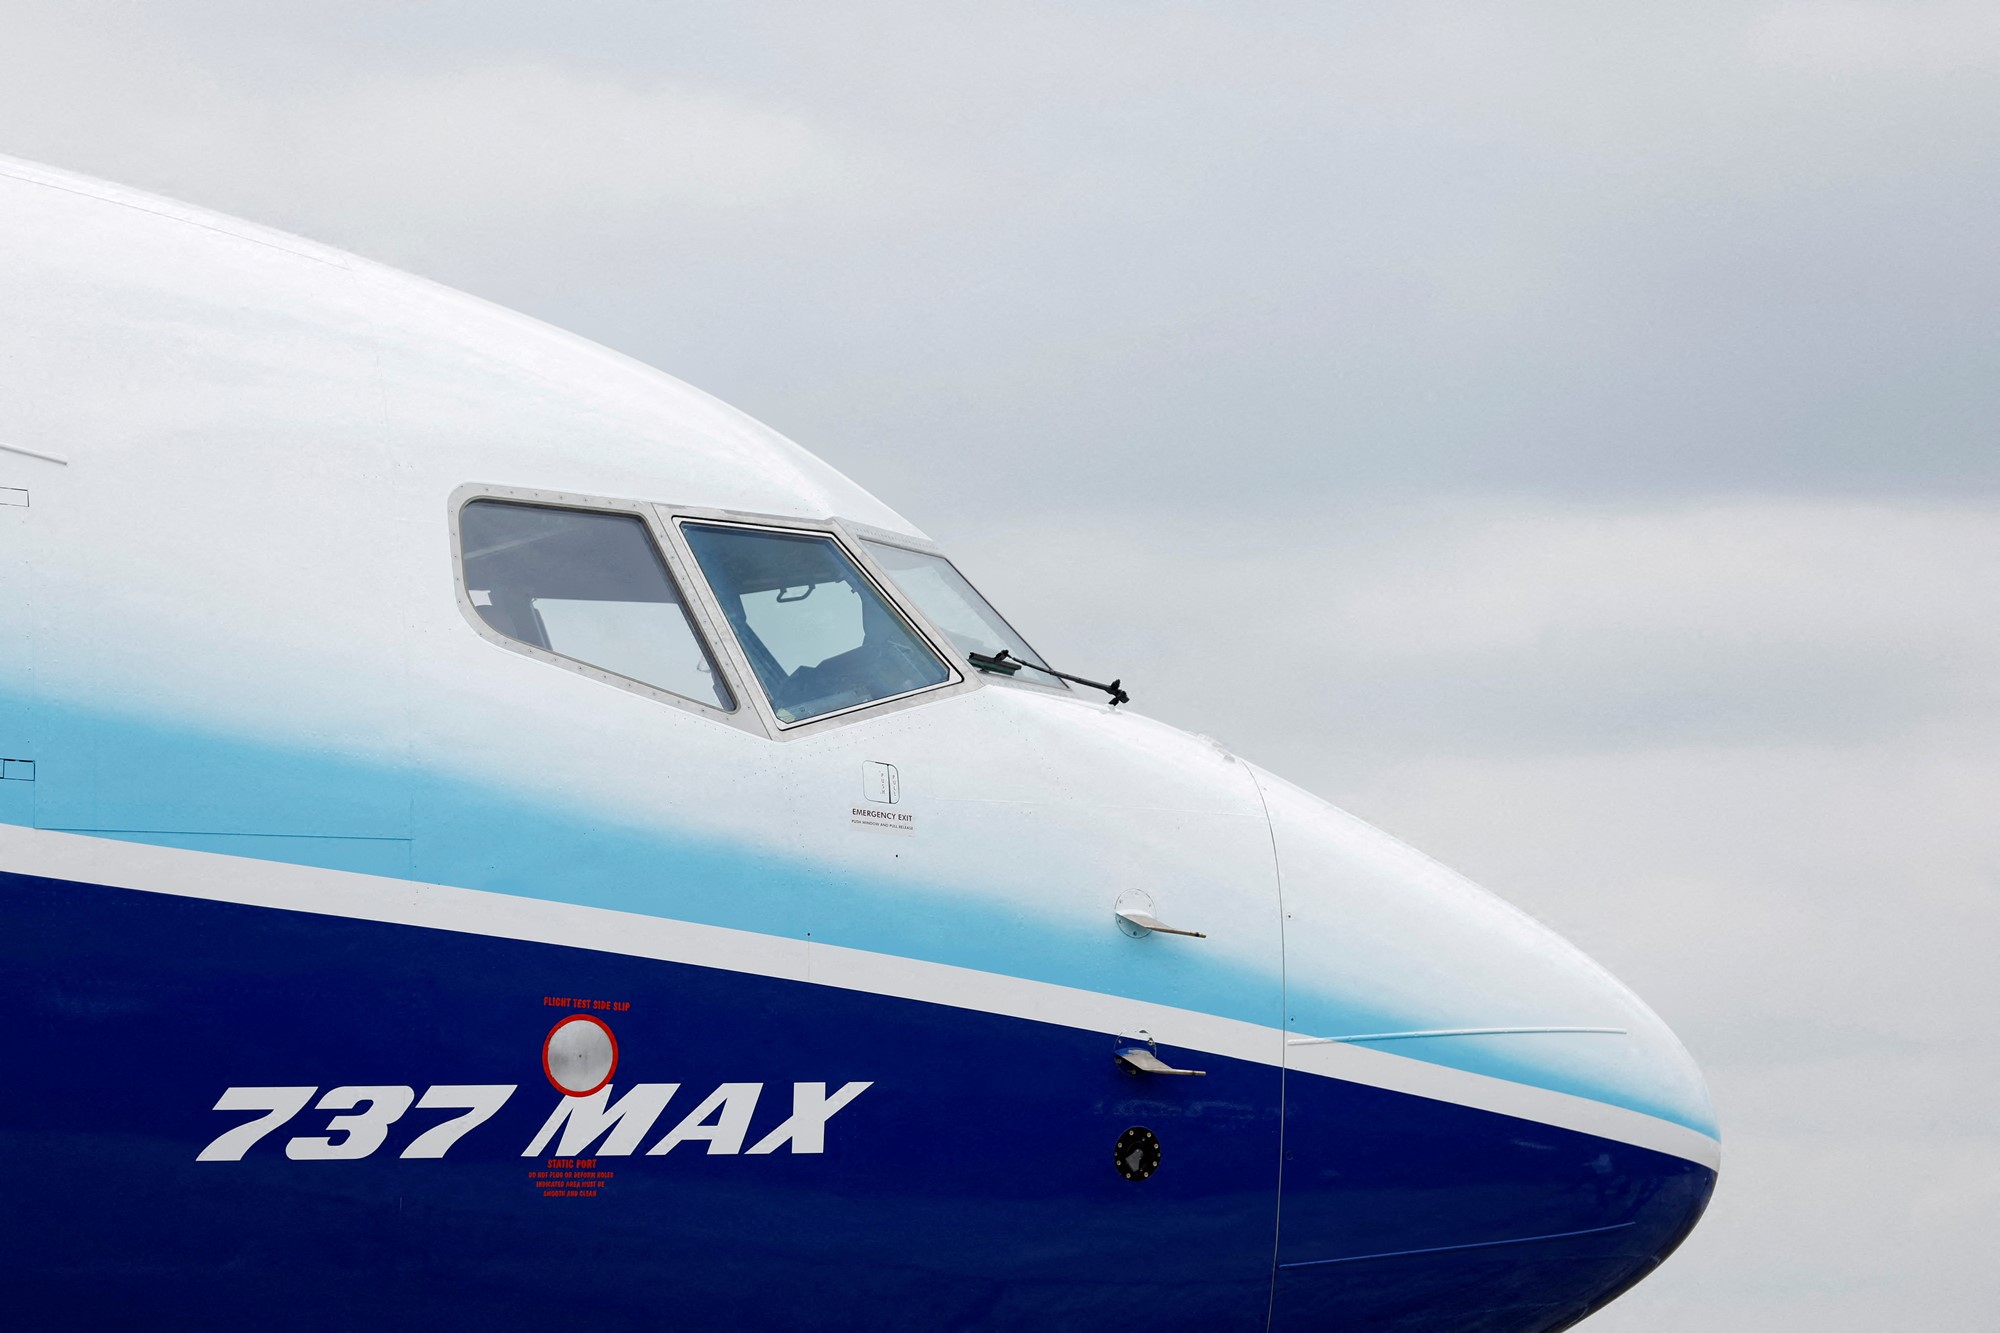 The Boeing 737 MAX aircraft is displayed at the Farnborough International Airshow